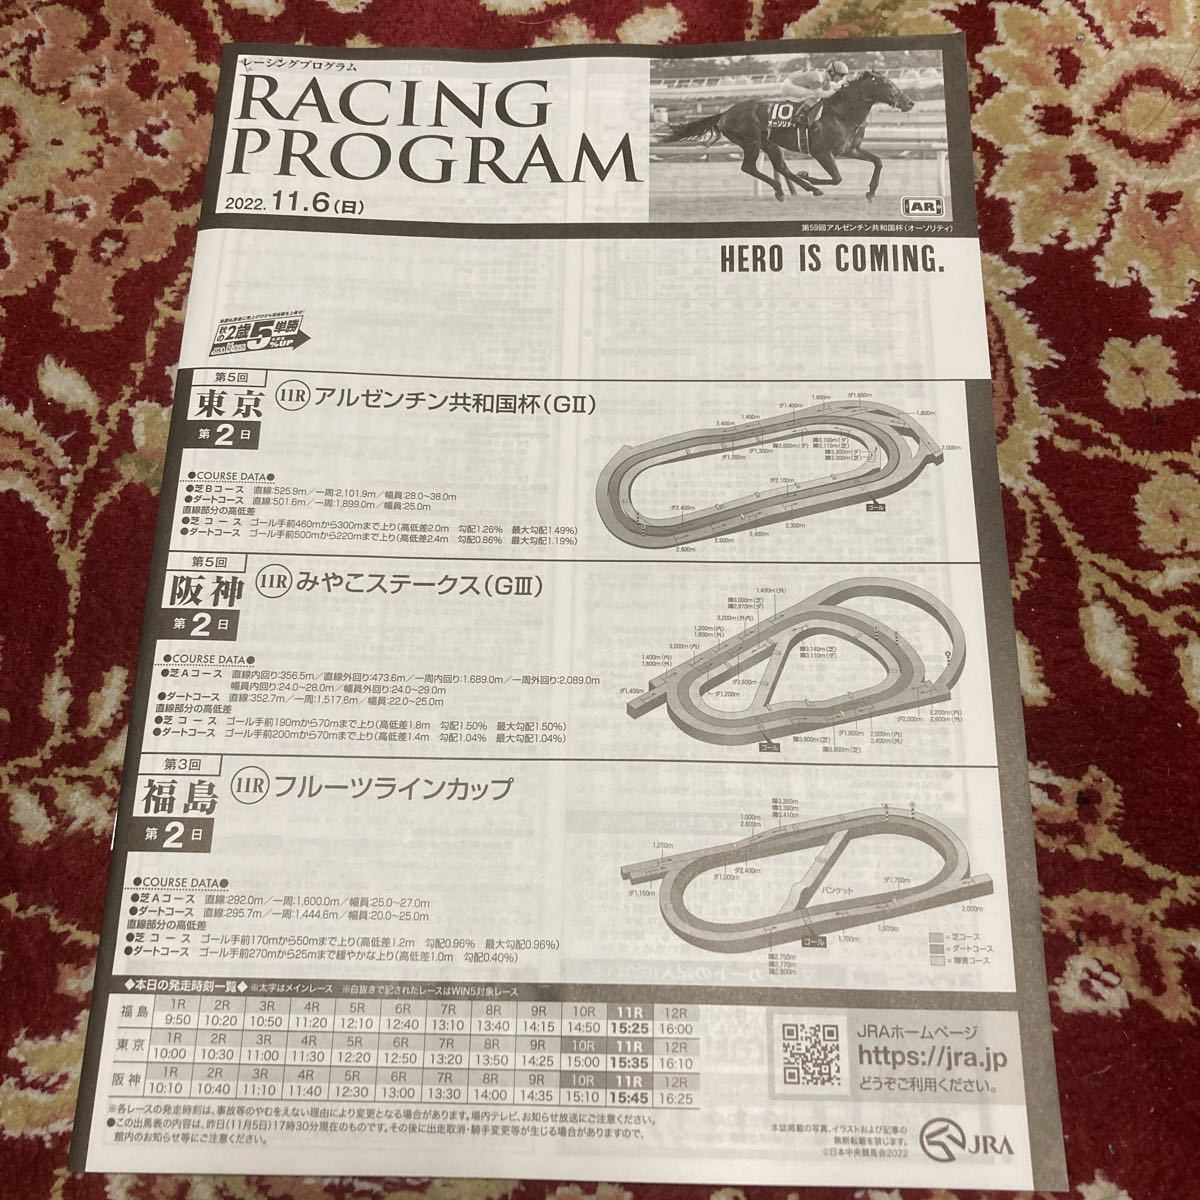 JRA Racing Program 2022.11.6( day ) Argentina also peace country cup (GⅡ),... stay ks(GⅢ), fruit line cup 